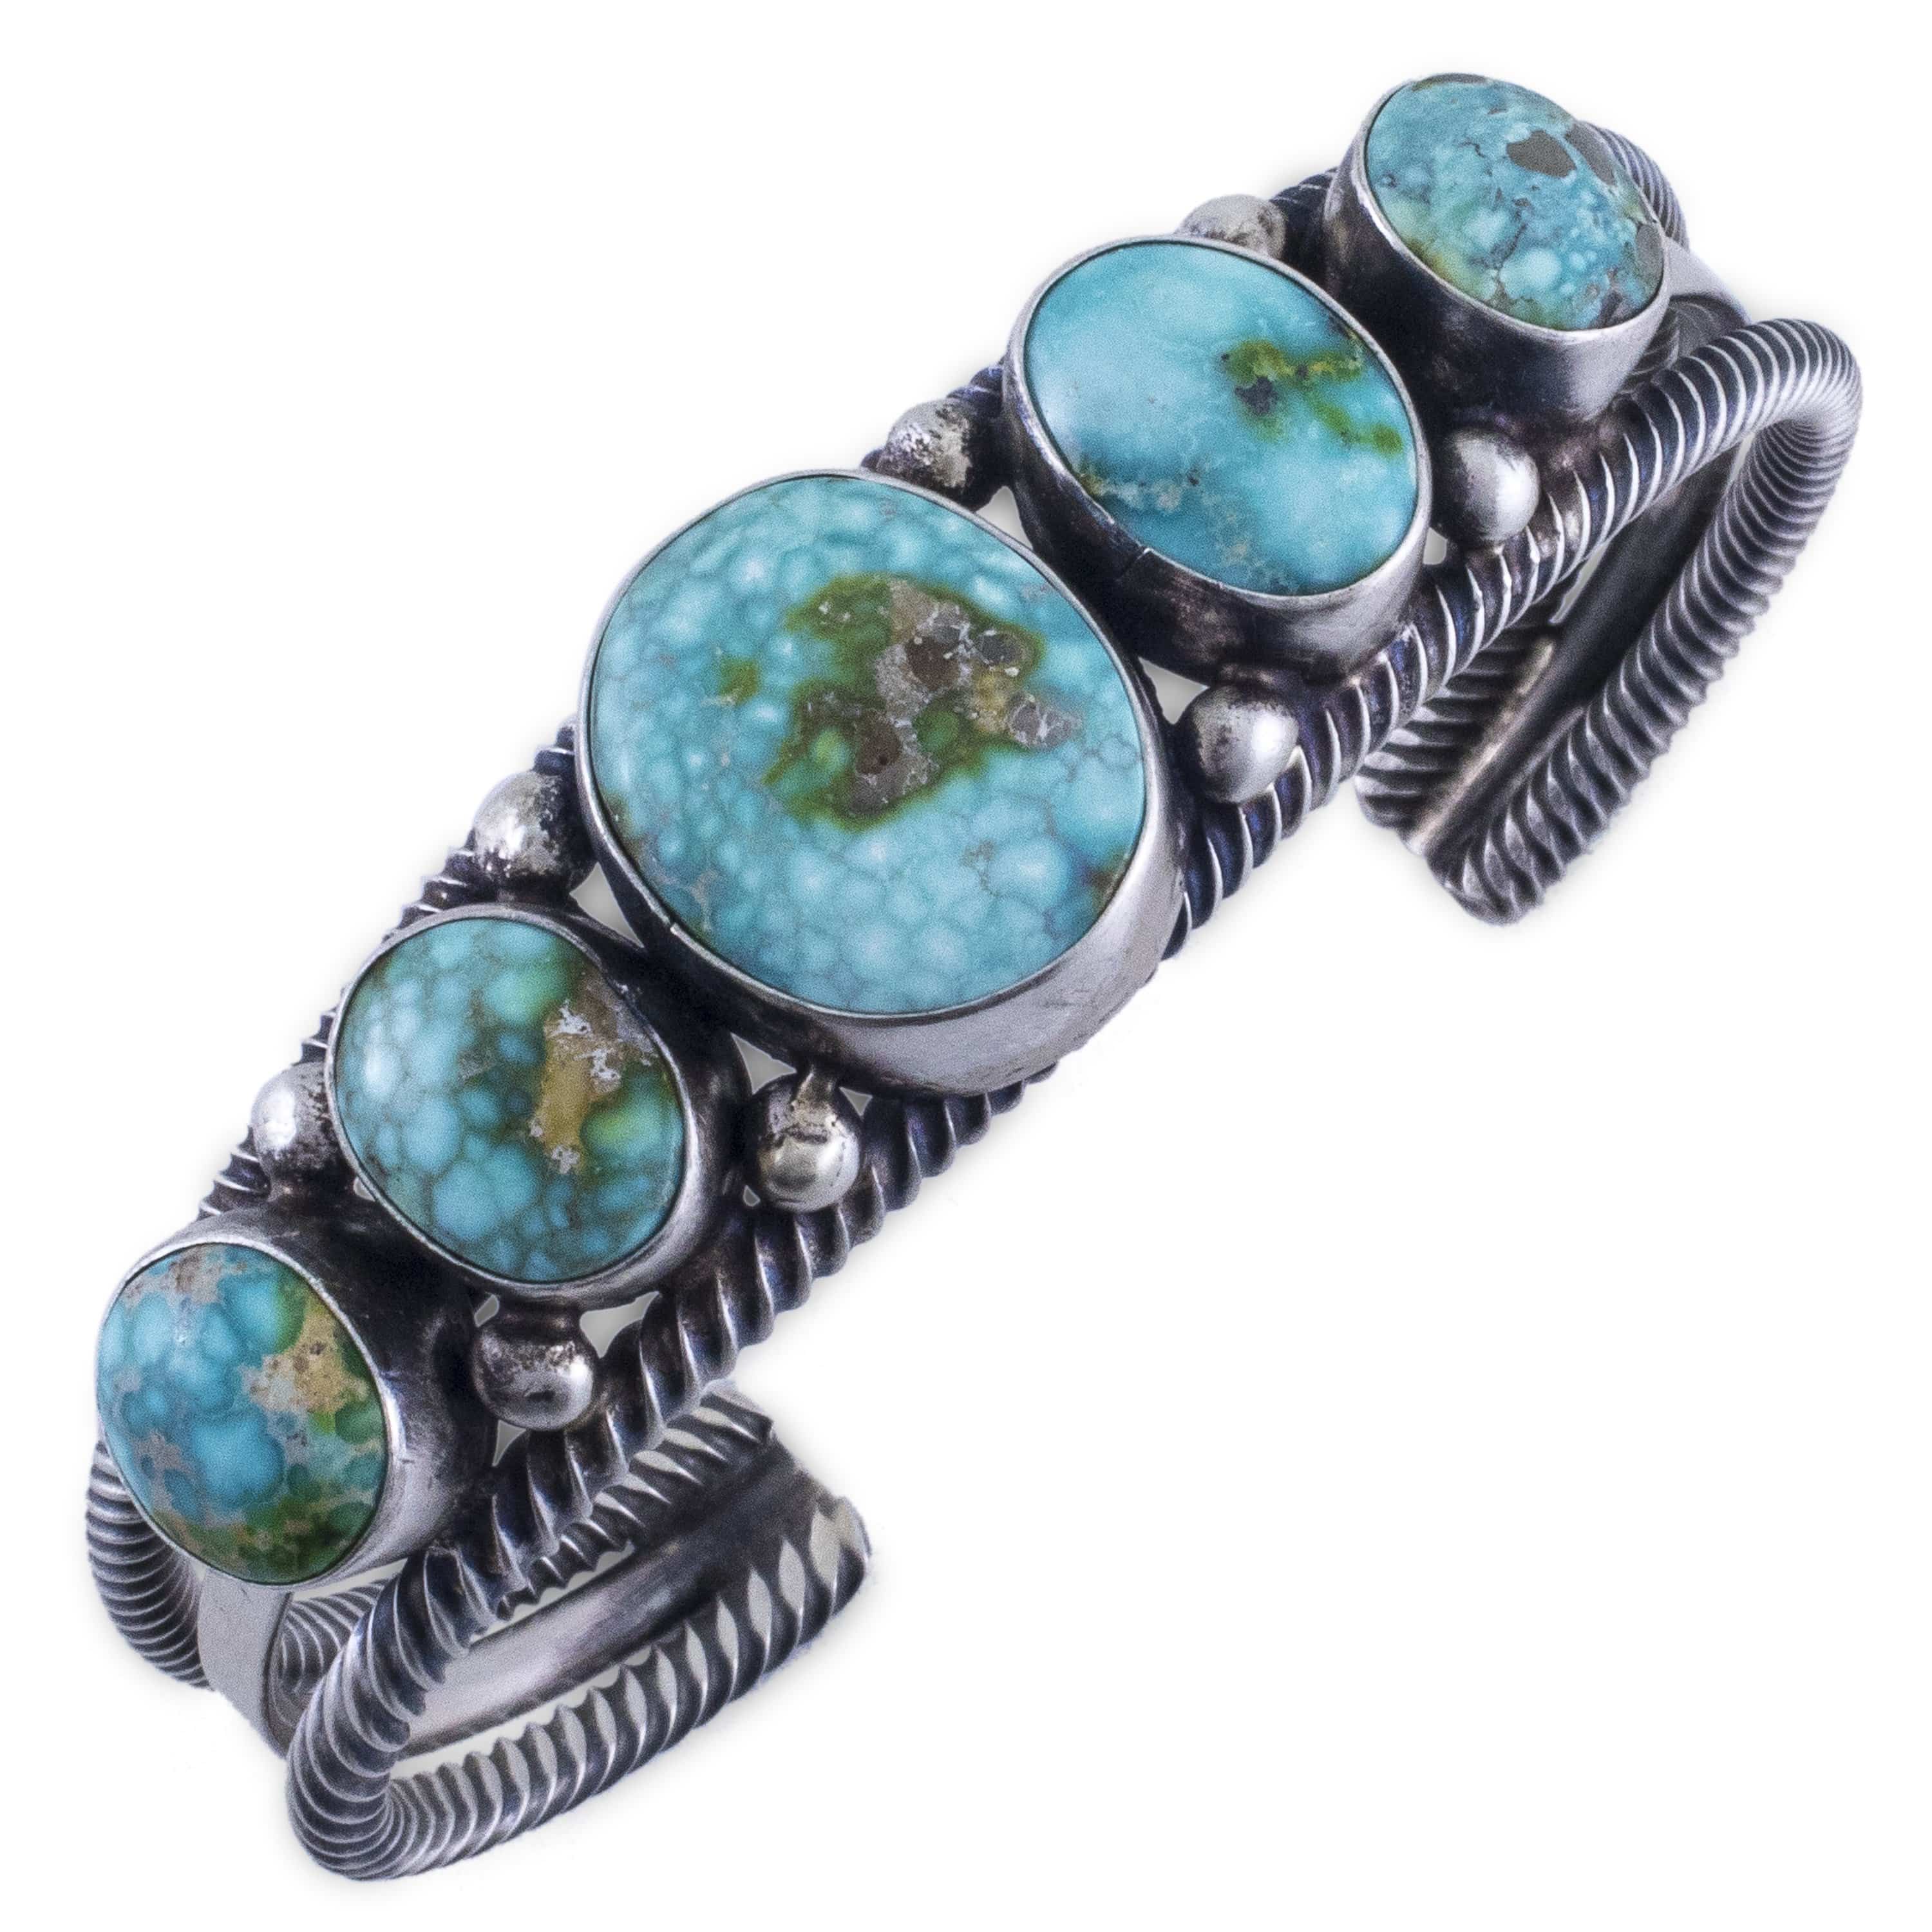 Kalifano Native American Jewelry B. Johnson Sonoran Gold Turquoise USA Native American Made 925 Sterling Silver Cuff NAB2400.003